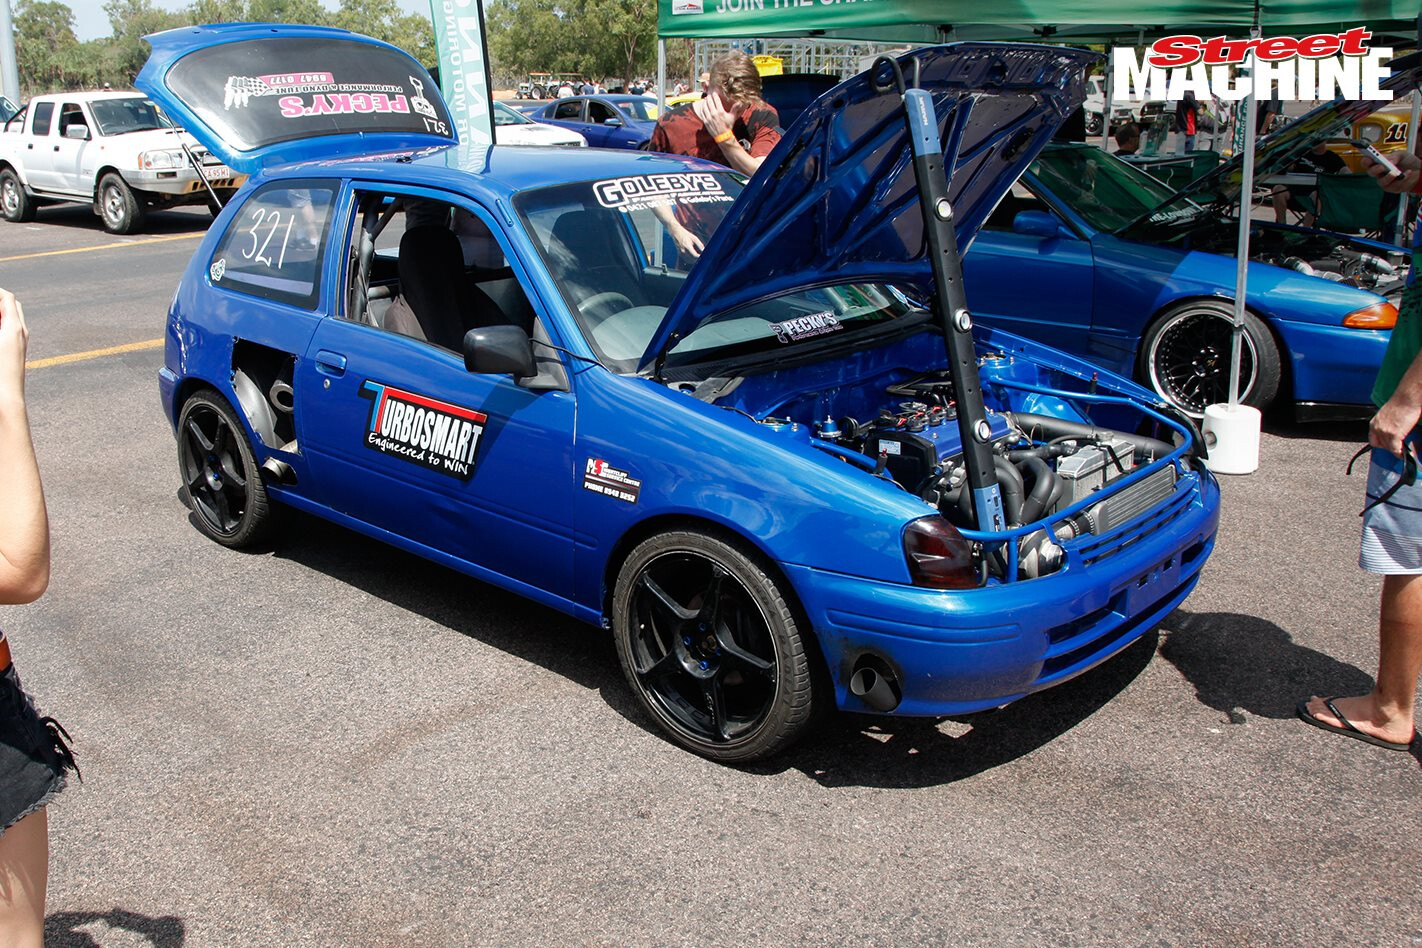 600hp twin-engine Toyota Starlet – Video